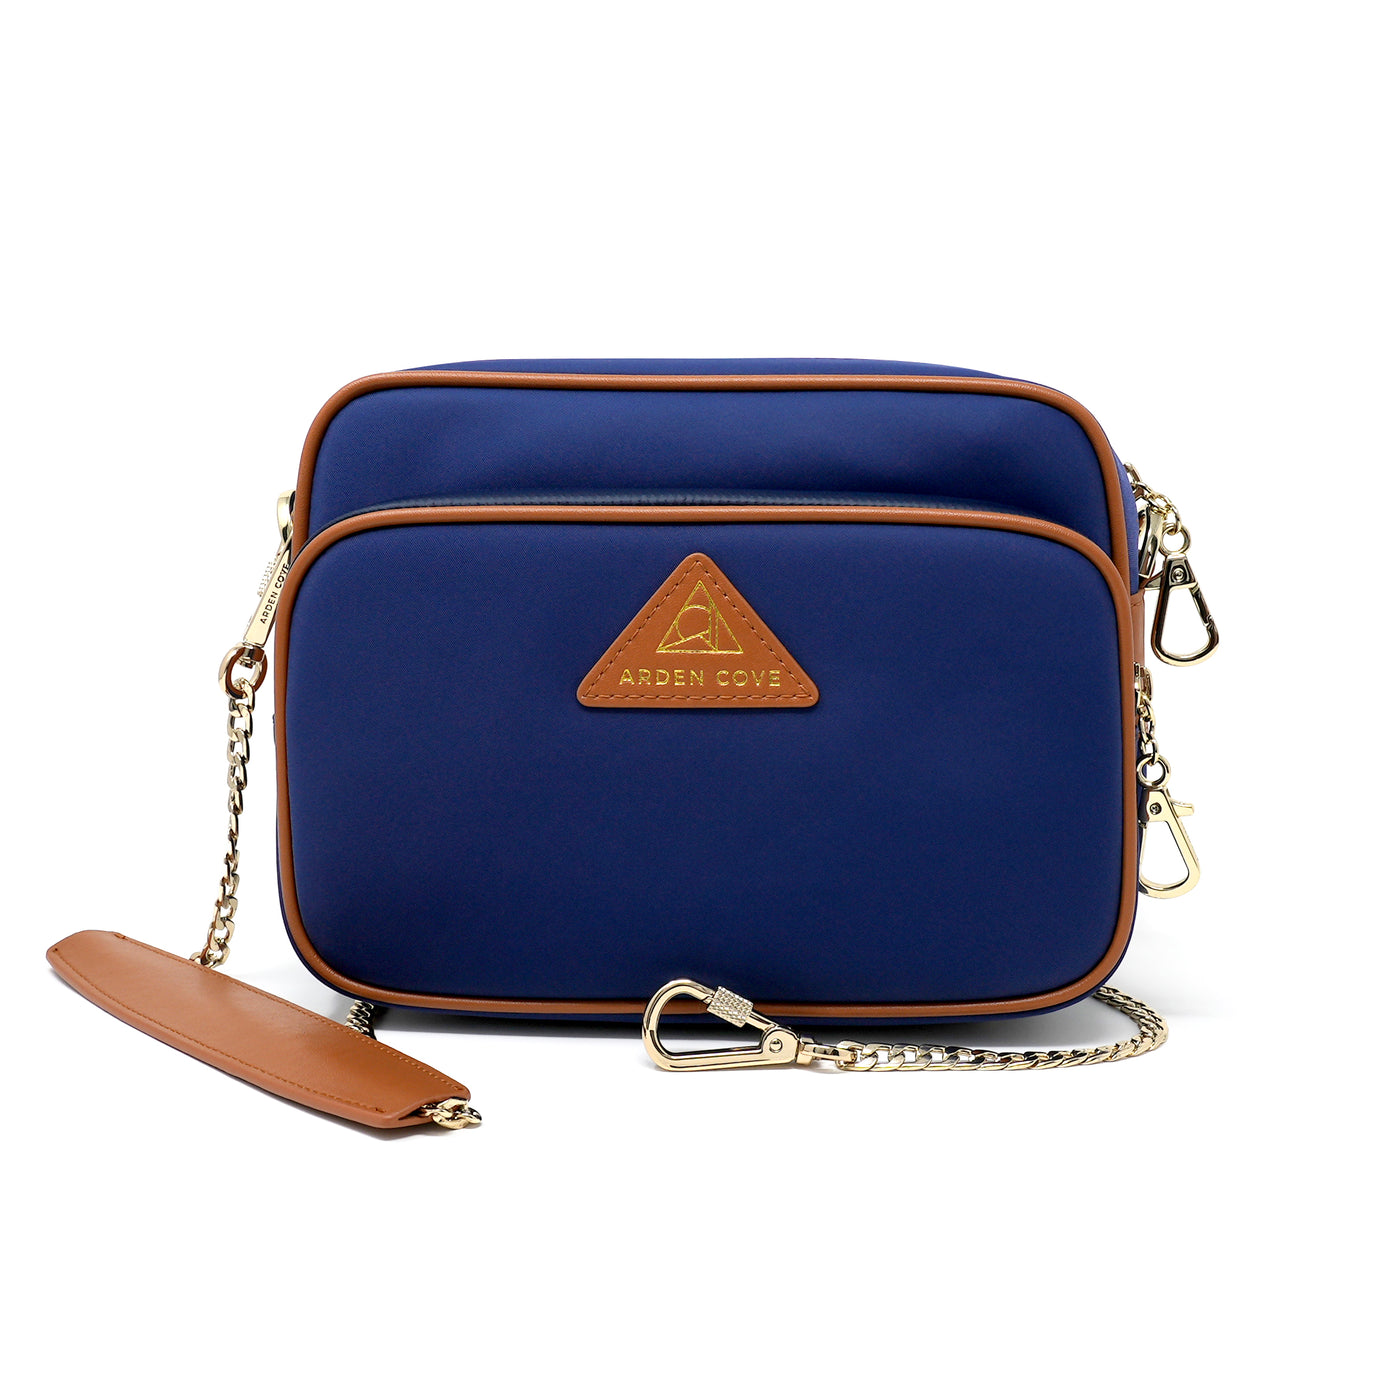 Anti-theft Water-resistant Travel Crossbody - Crissy Full Crossbody in Navy Gold with slash-resistant chain & locking clasps straps - front view - Arden Cove